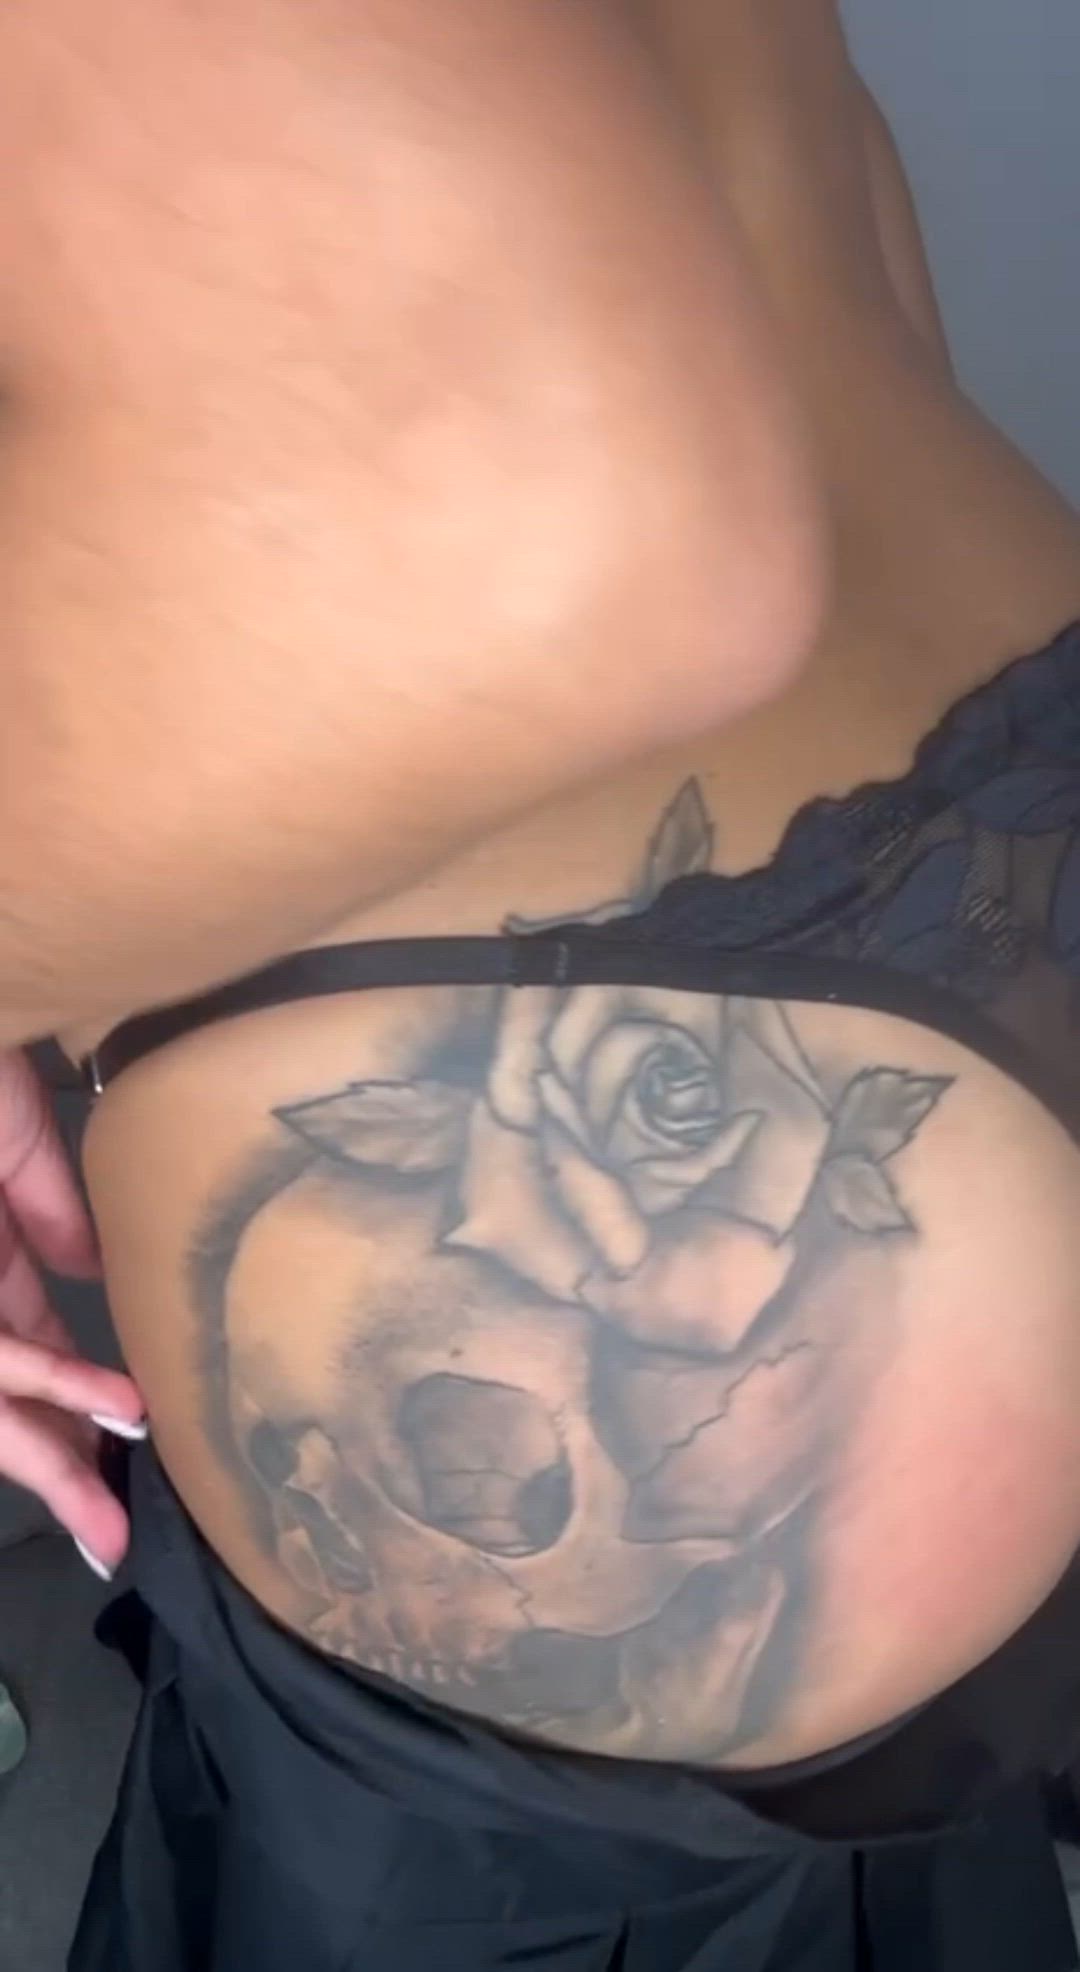 Ass porn video with onlyfans model dorothyqxx <strong>@wannabefvcked</strong>